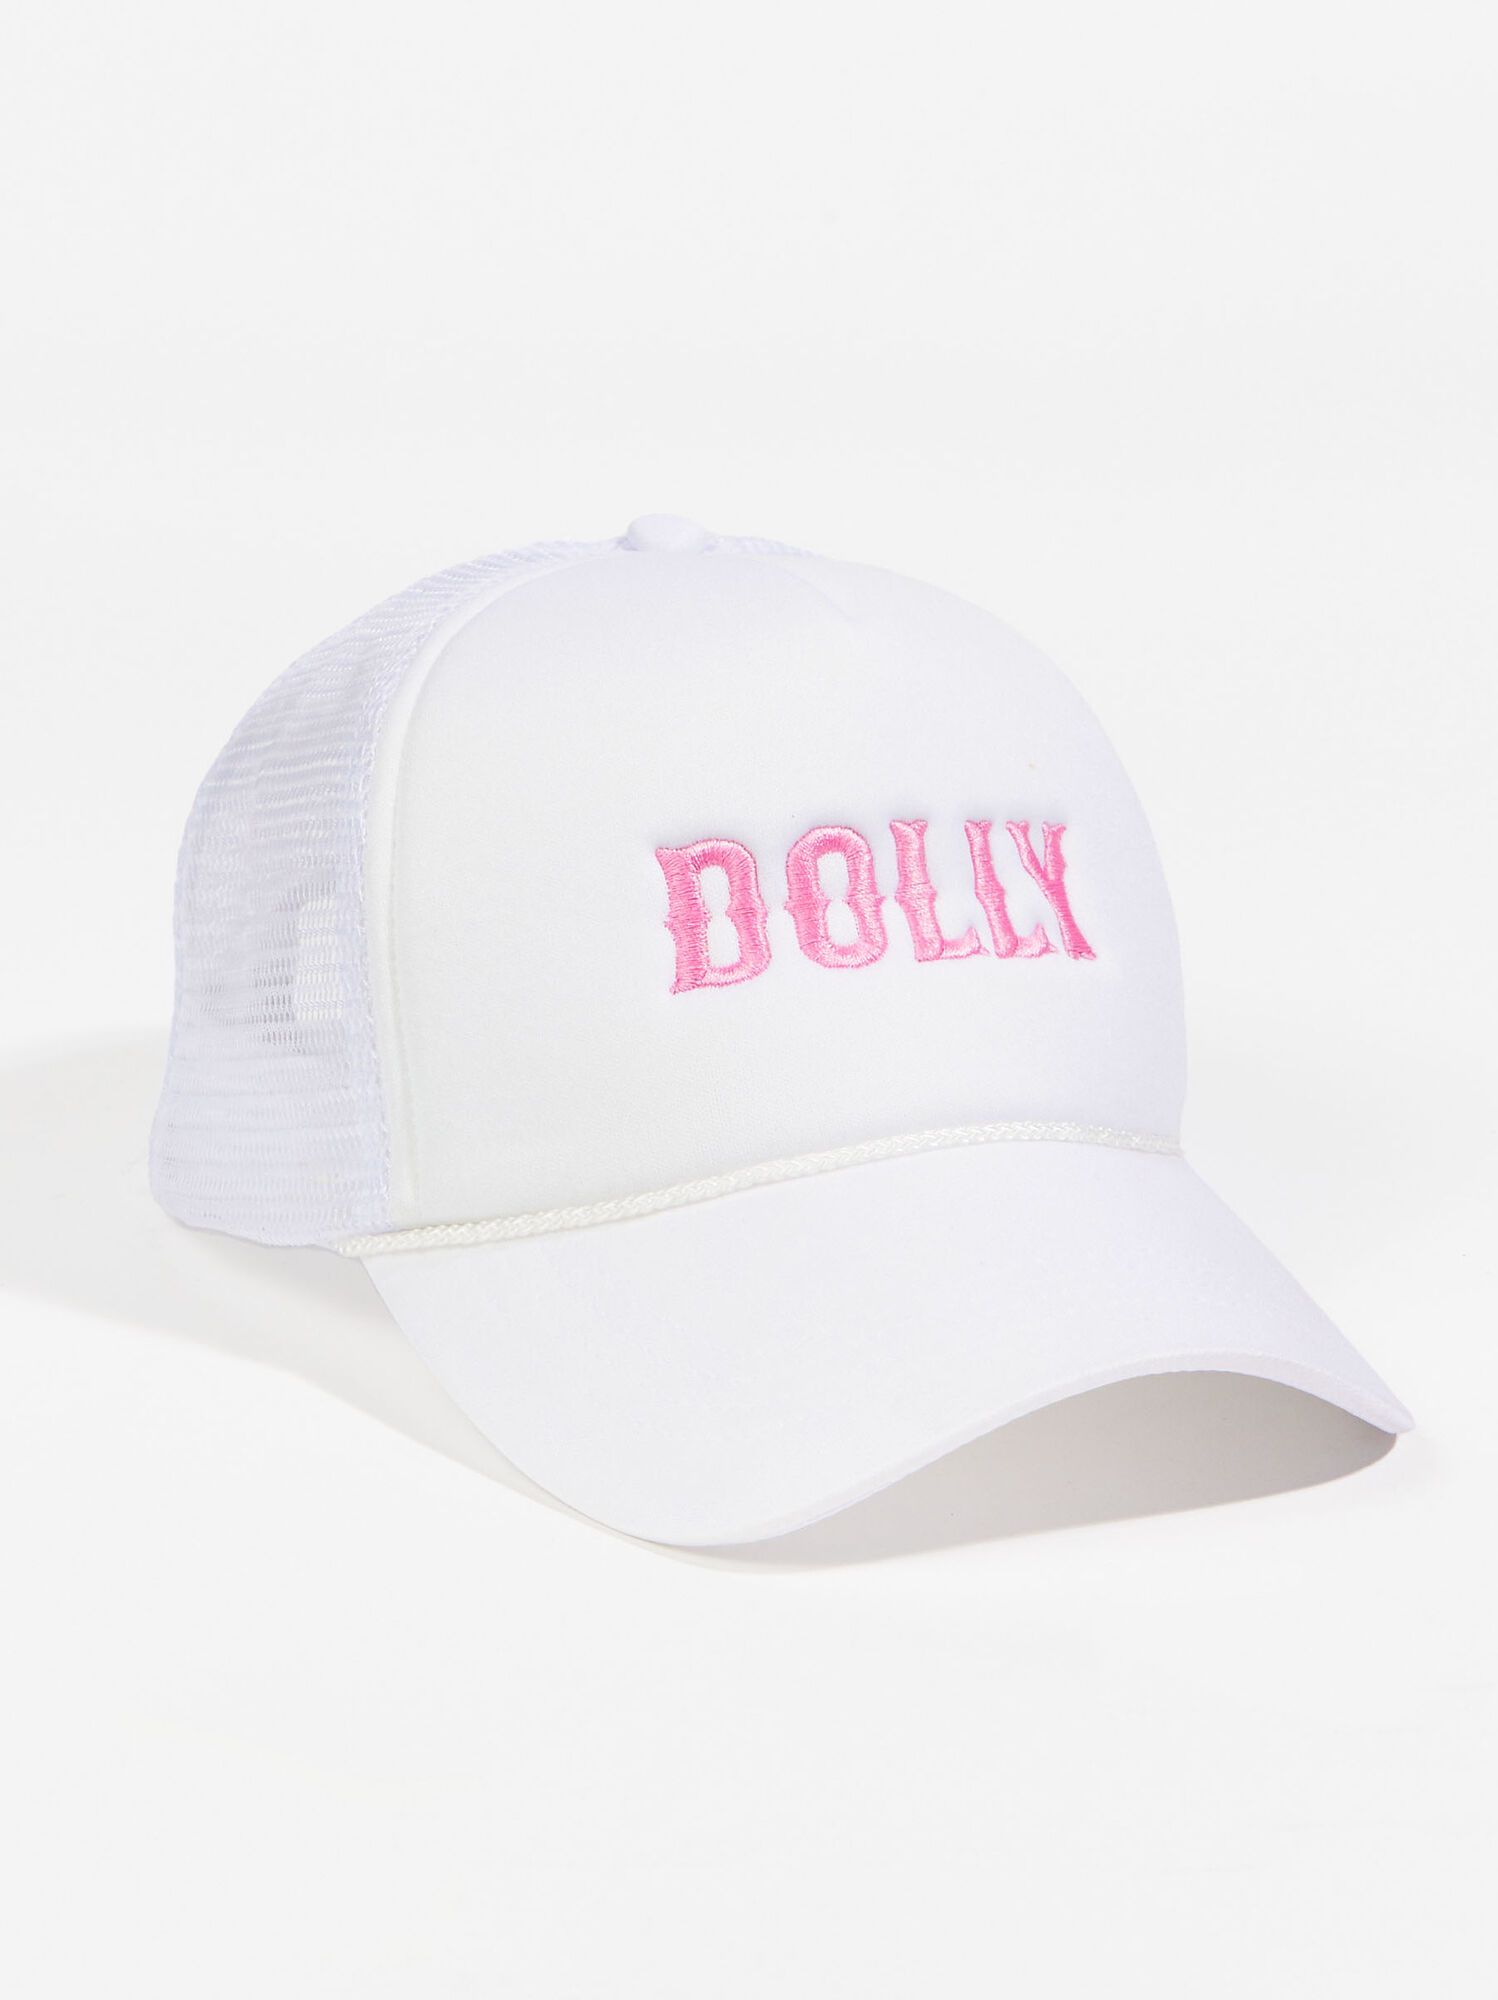 Dolly Trucker Hat | Altar'd State